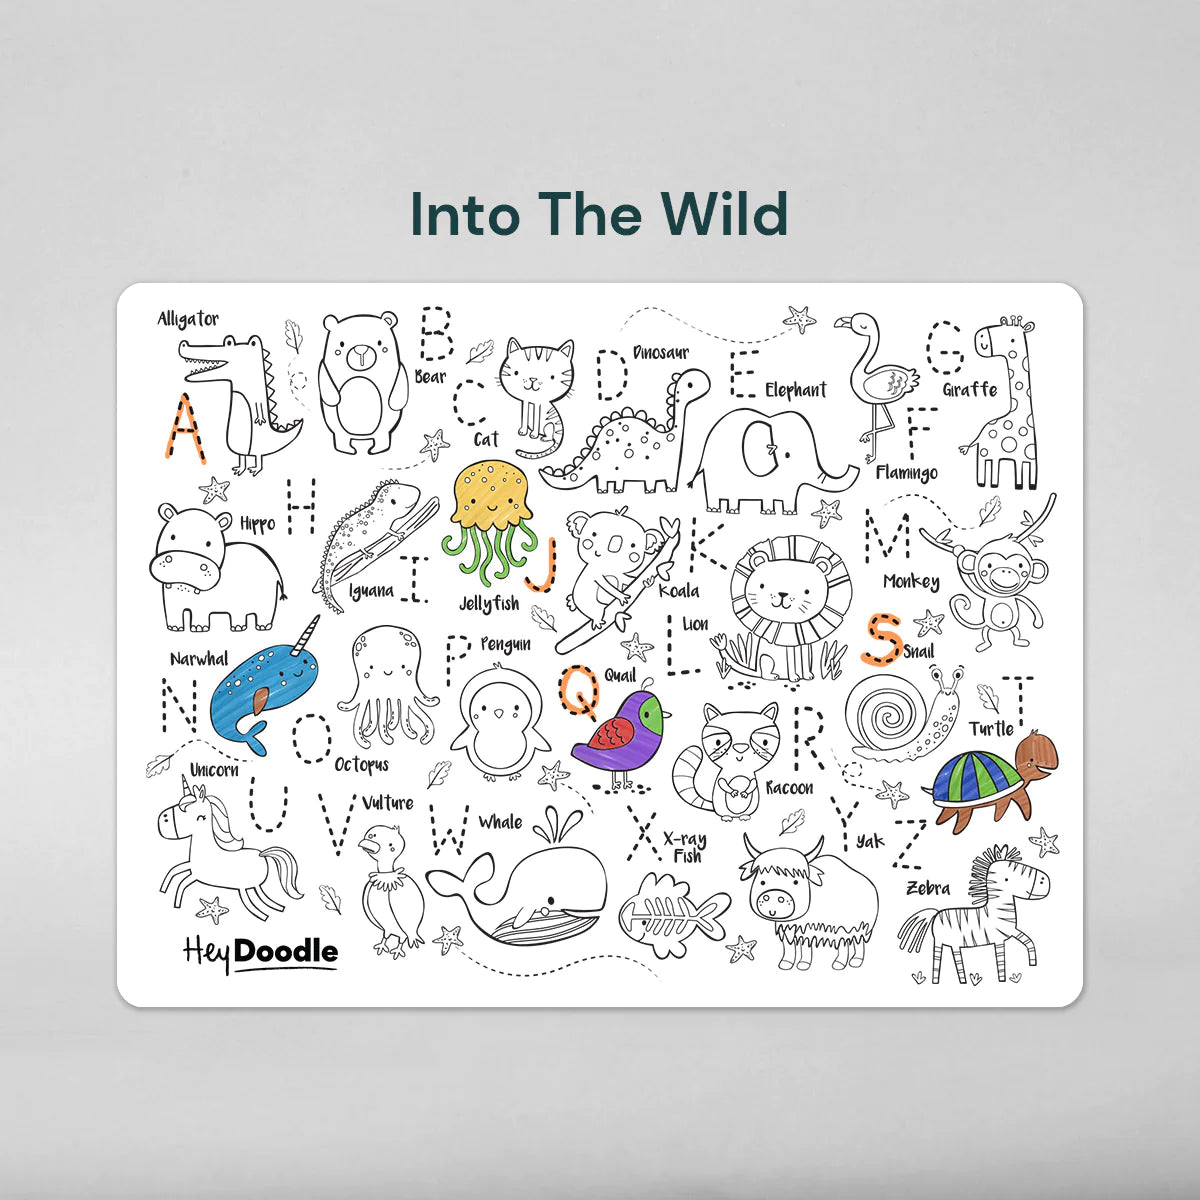 Hey Doodle - Into the Wild Colouring Mat